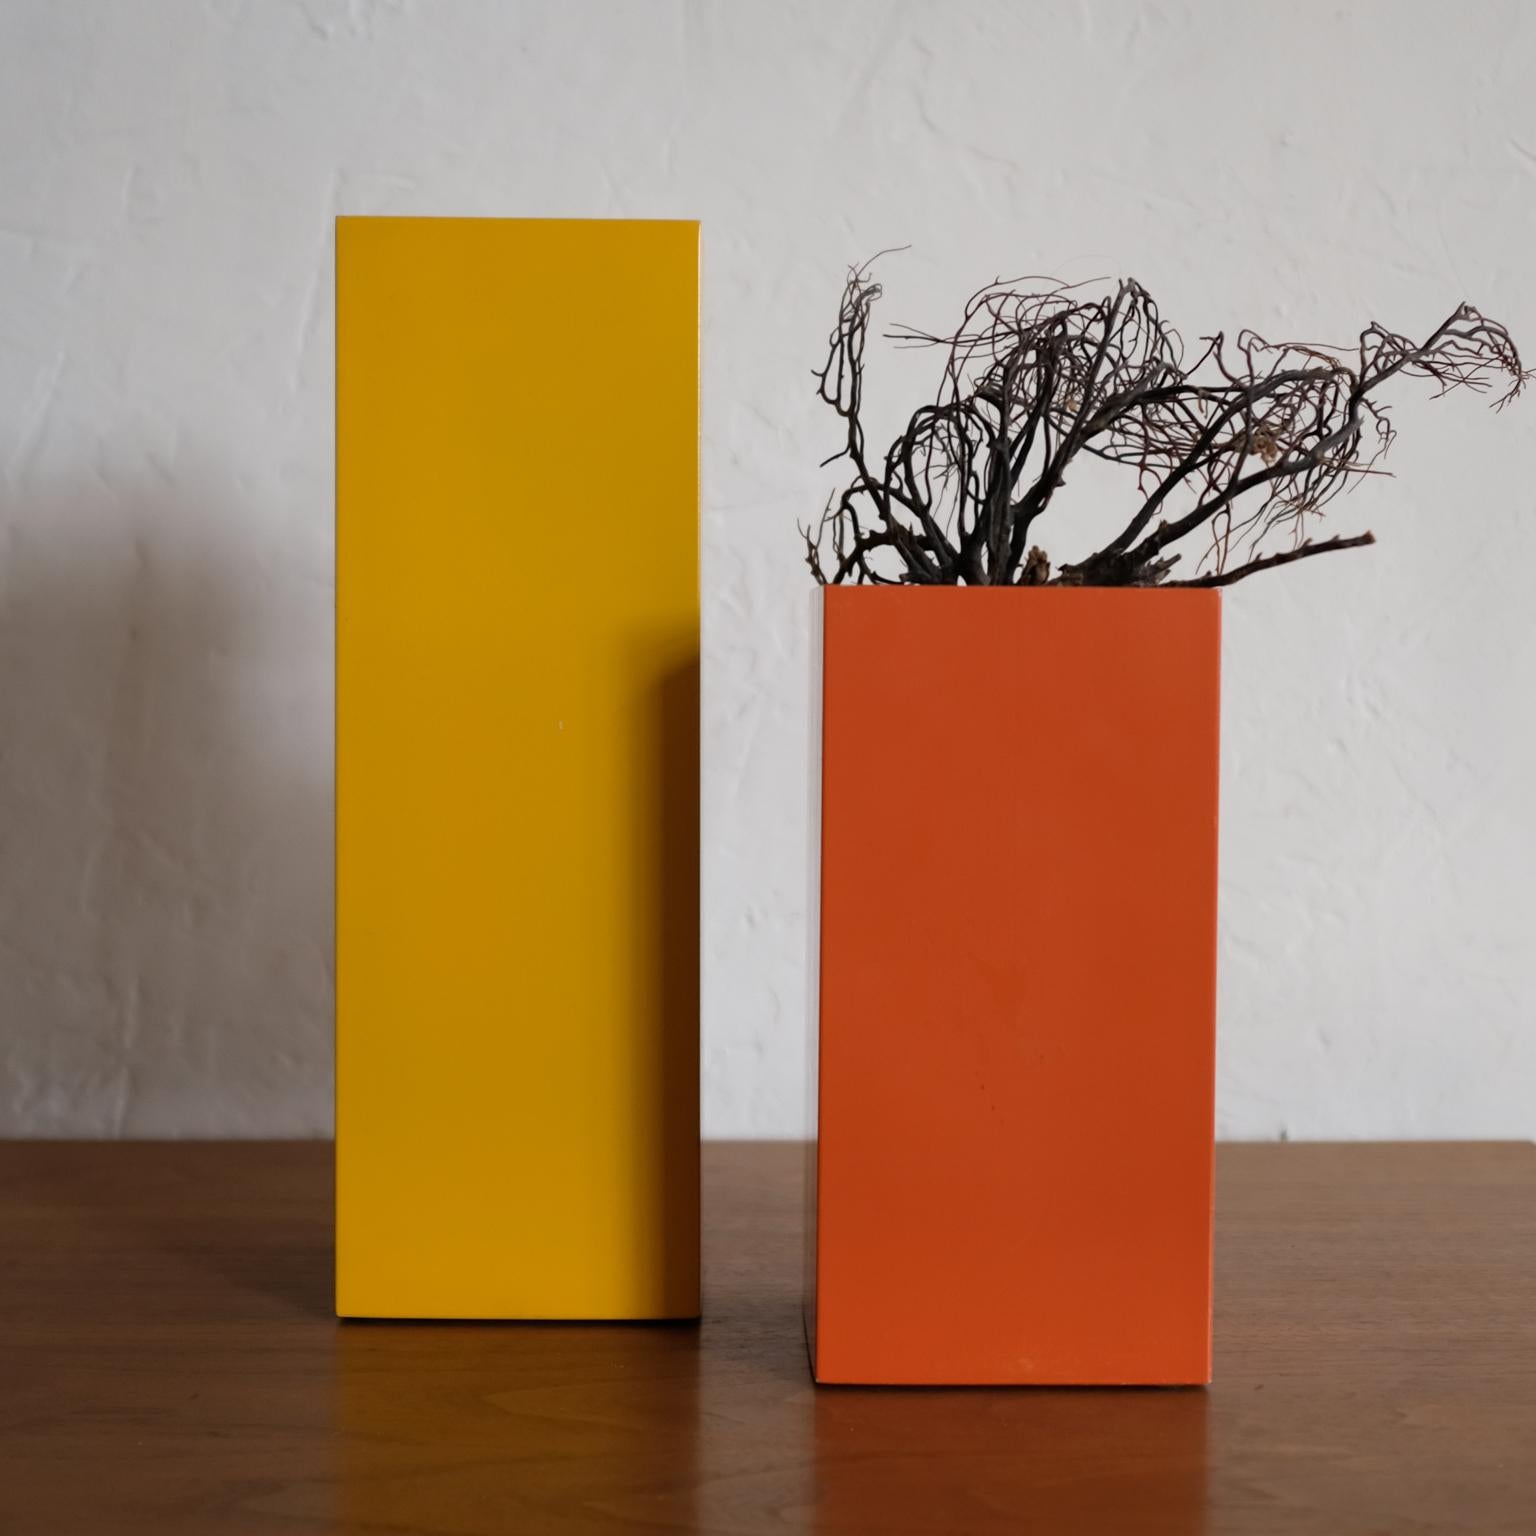 A pair of metal vases designed by Bill Curry for his Company, Design Line. Designed and manufactured in El Segundo, CA in the 1960s. 

The vases can be used on a table or can be hung on a wall. The vases are 4